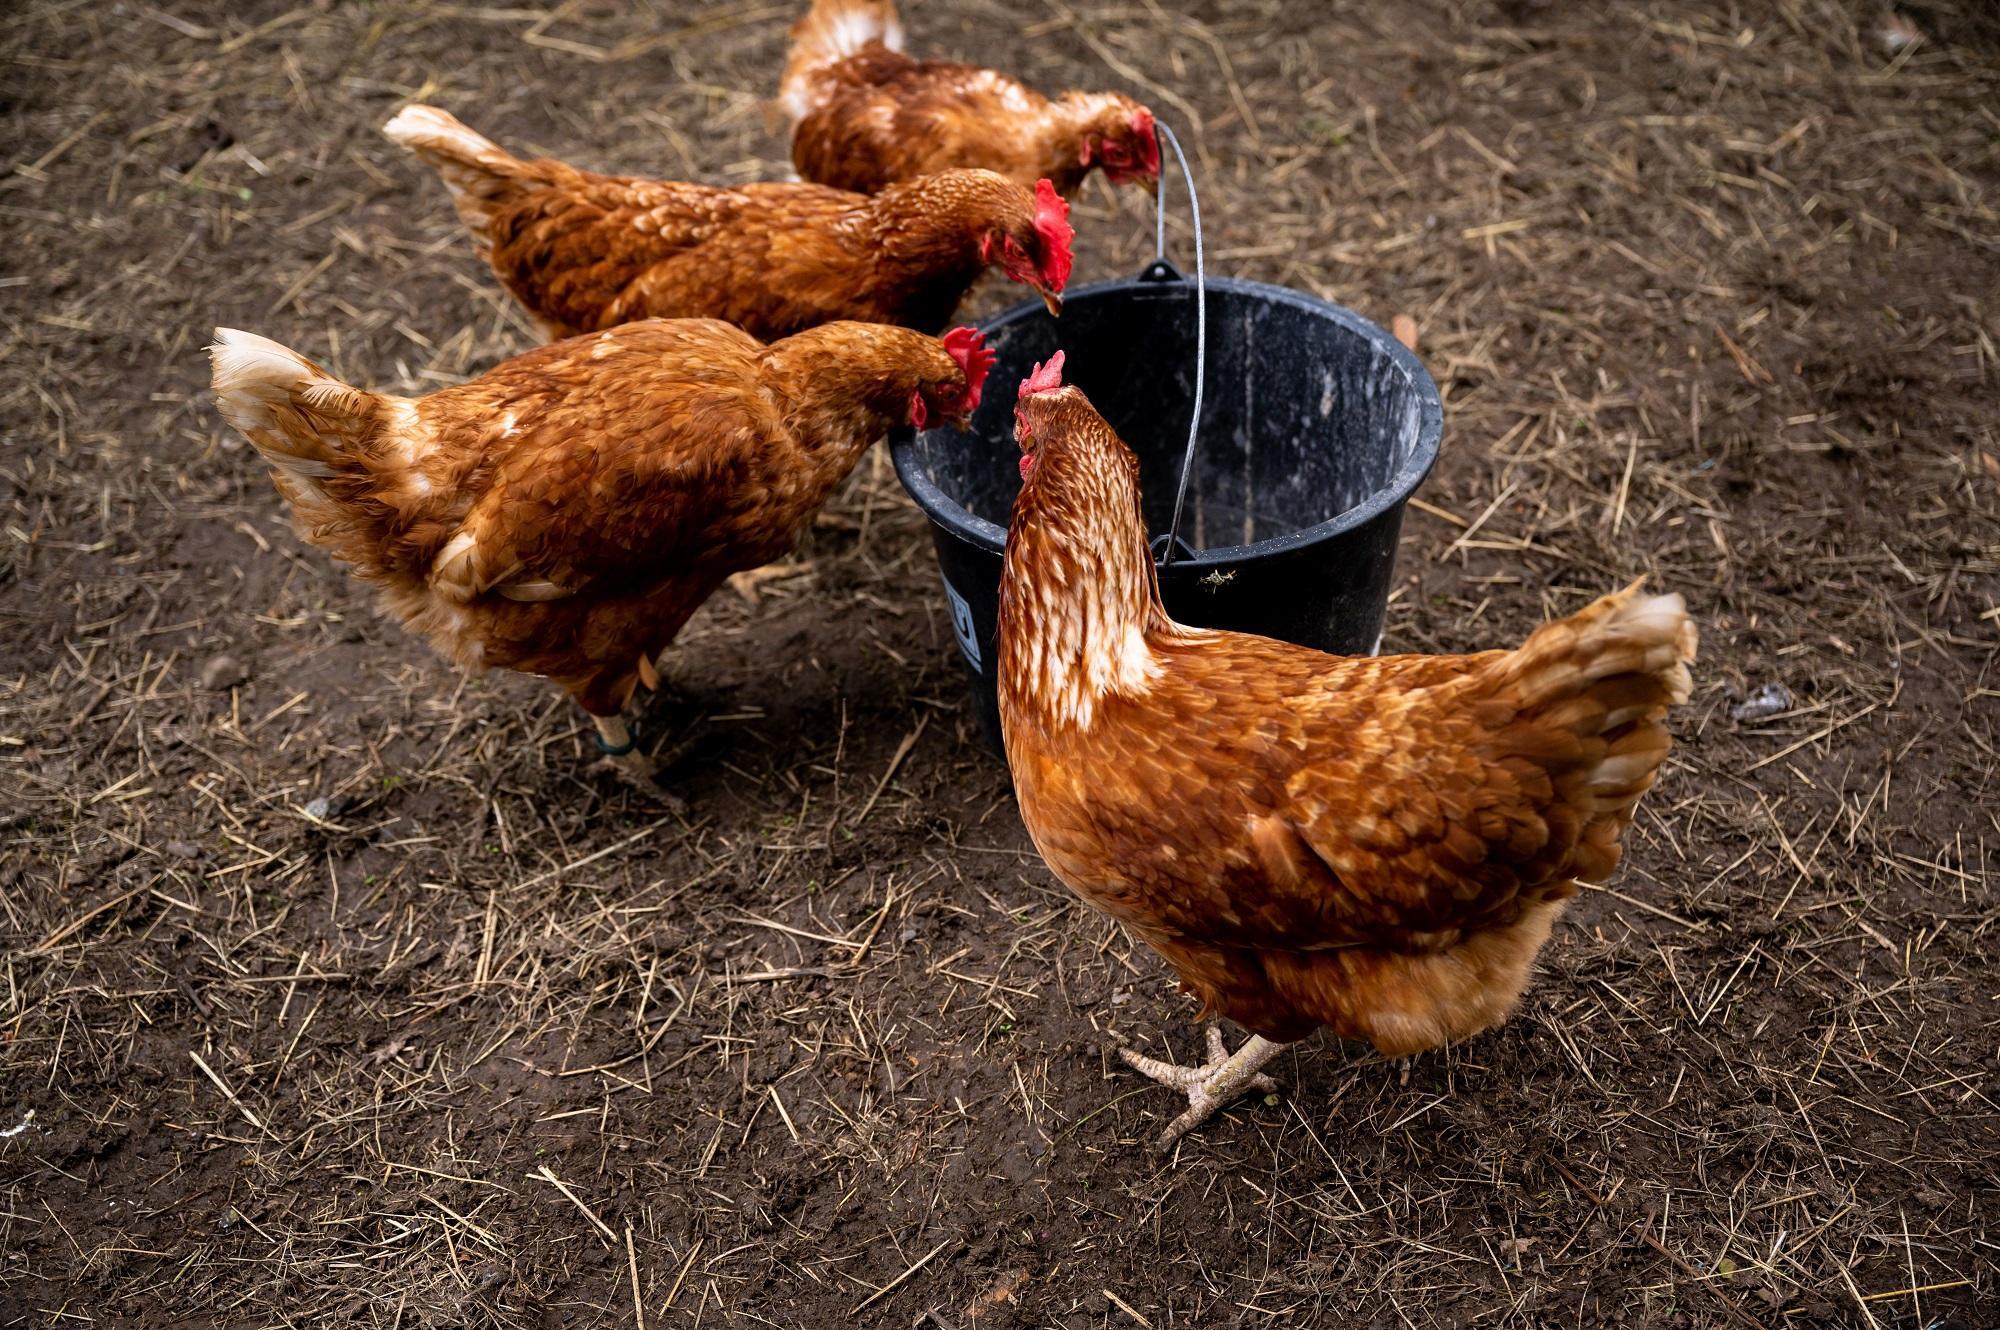 Four hens eating from a black bucket.